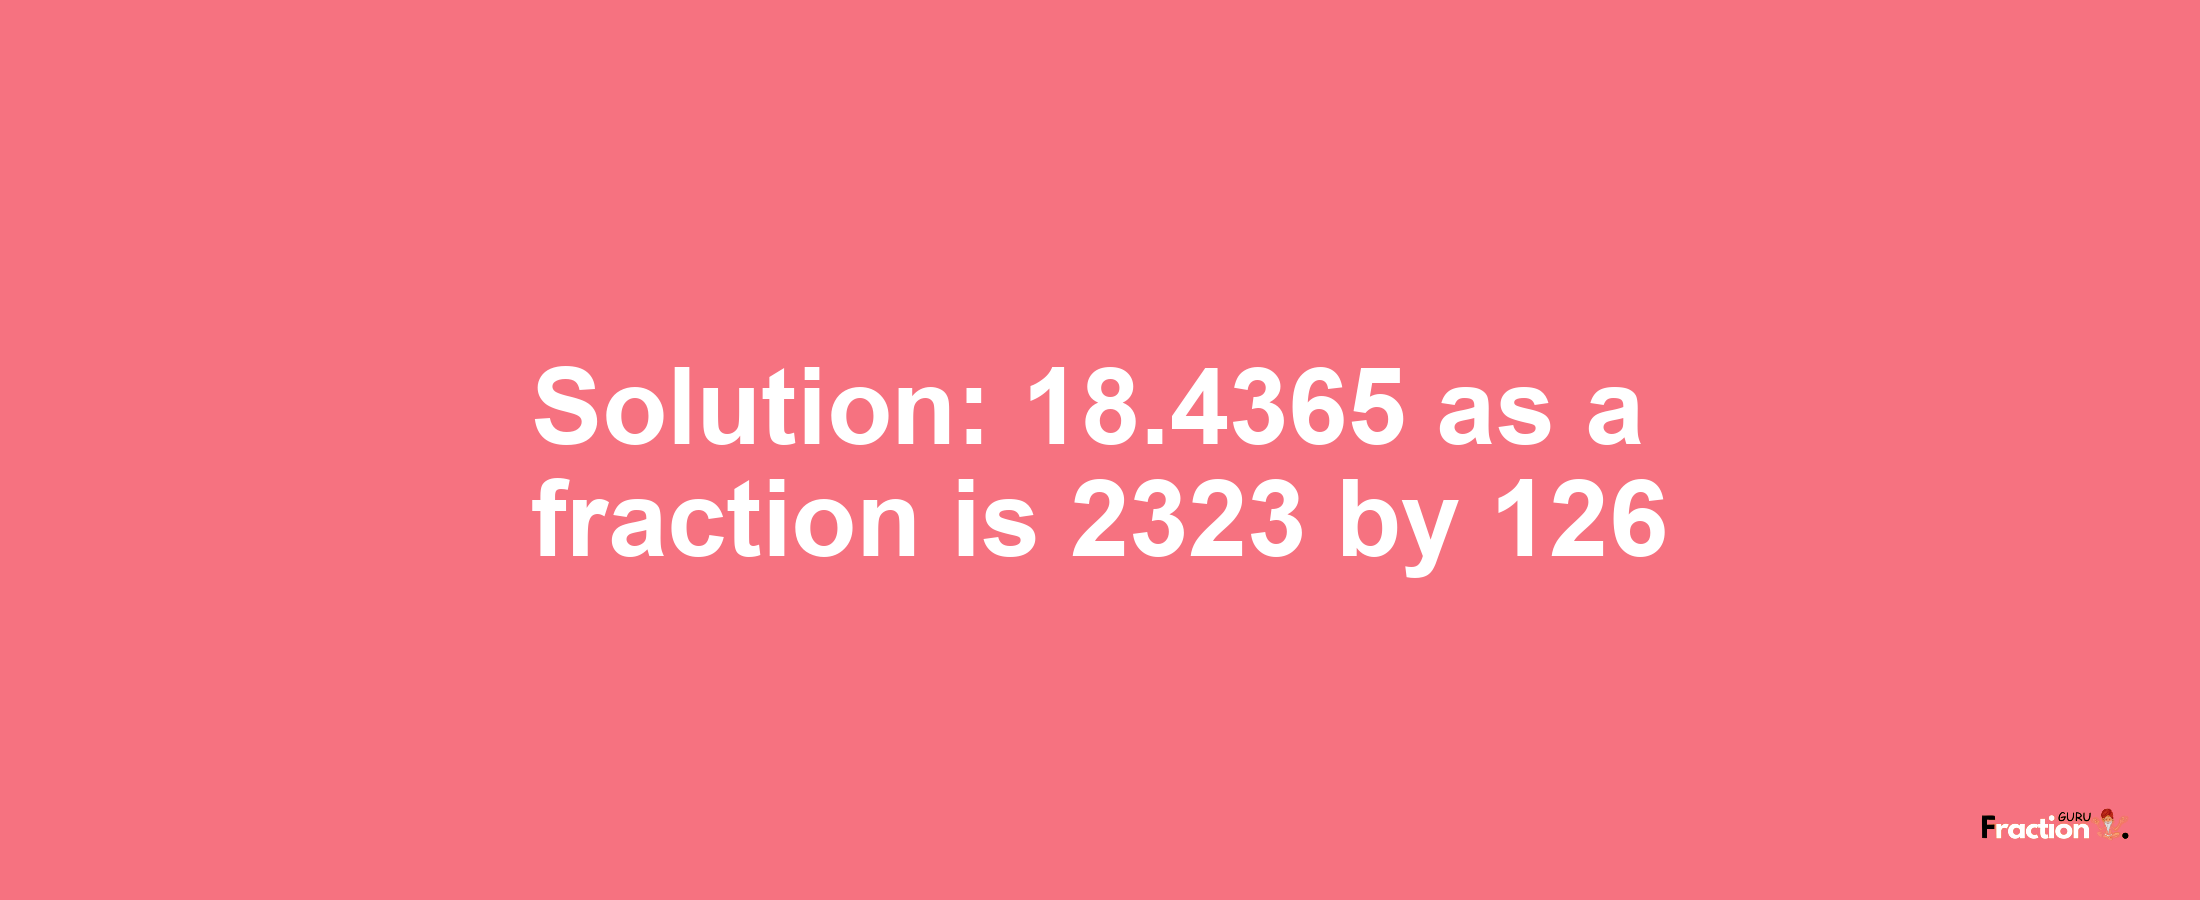 Solution:18.4365 as a fraction is 2323/126